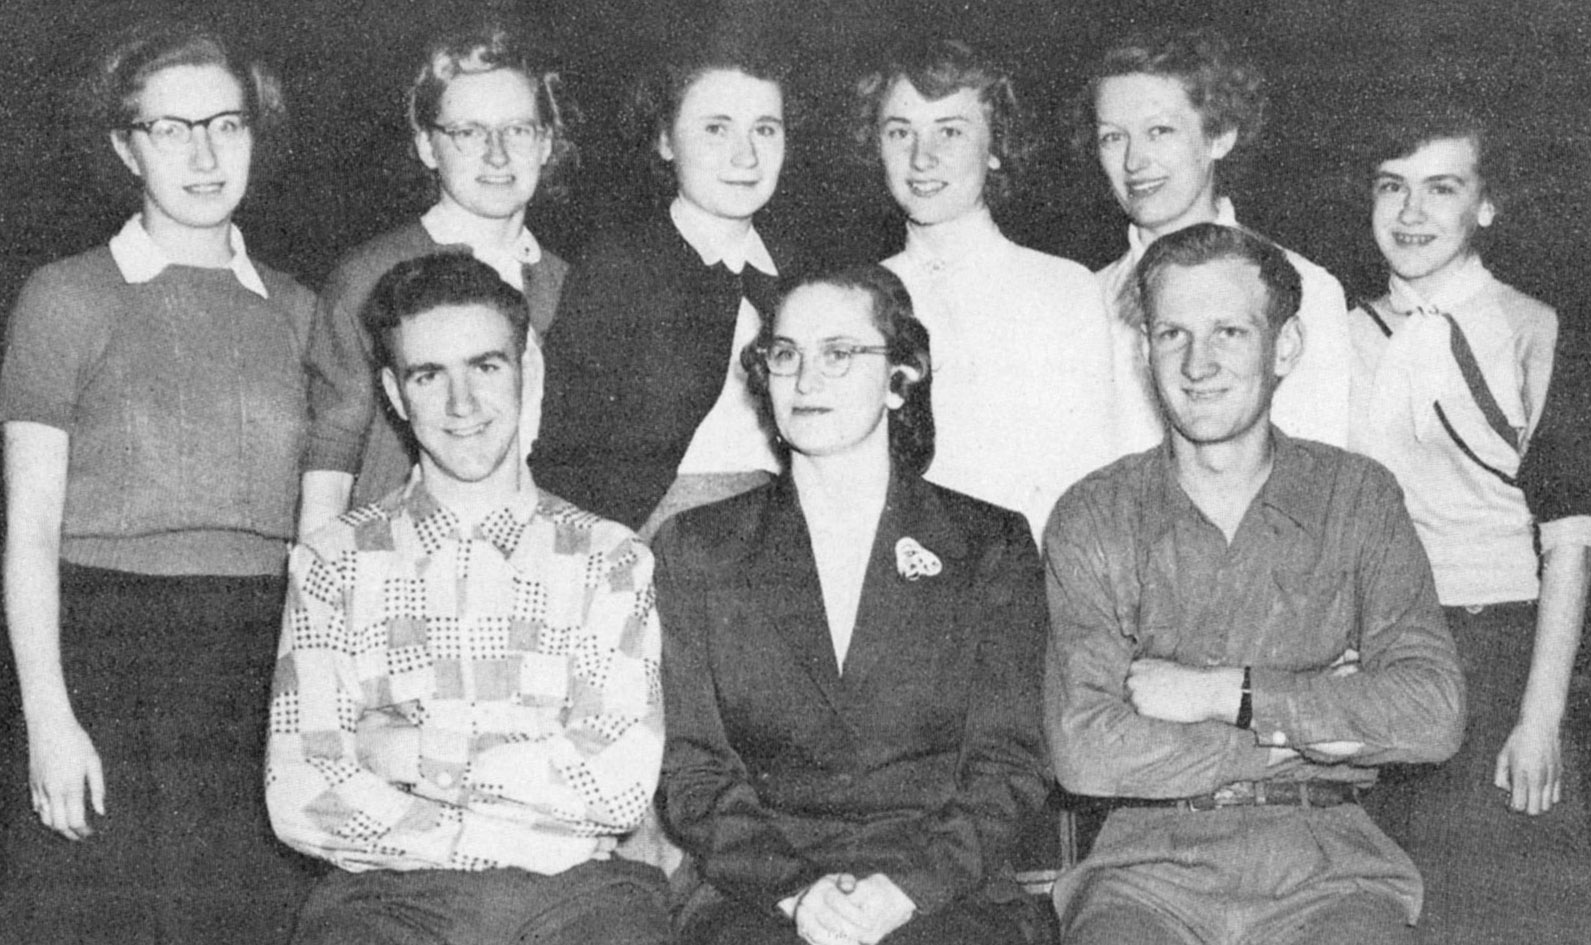 (Click to magnify) FRONT ROW: K. Wilson (president), Ms. Lennox, A. Maye; BACK ROW: L. Cullingham, G. Simpson, M. Rose, R. Noble, H. Feasby, B. Irwin.